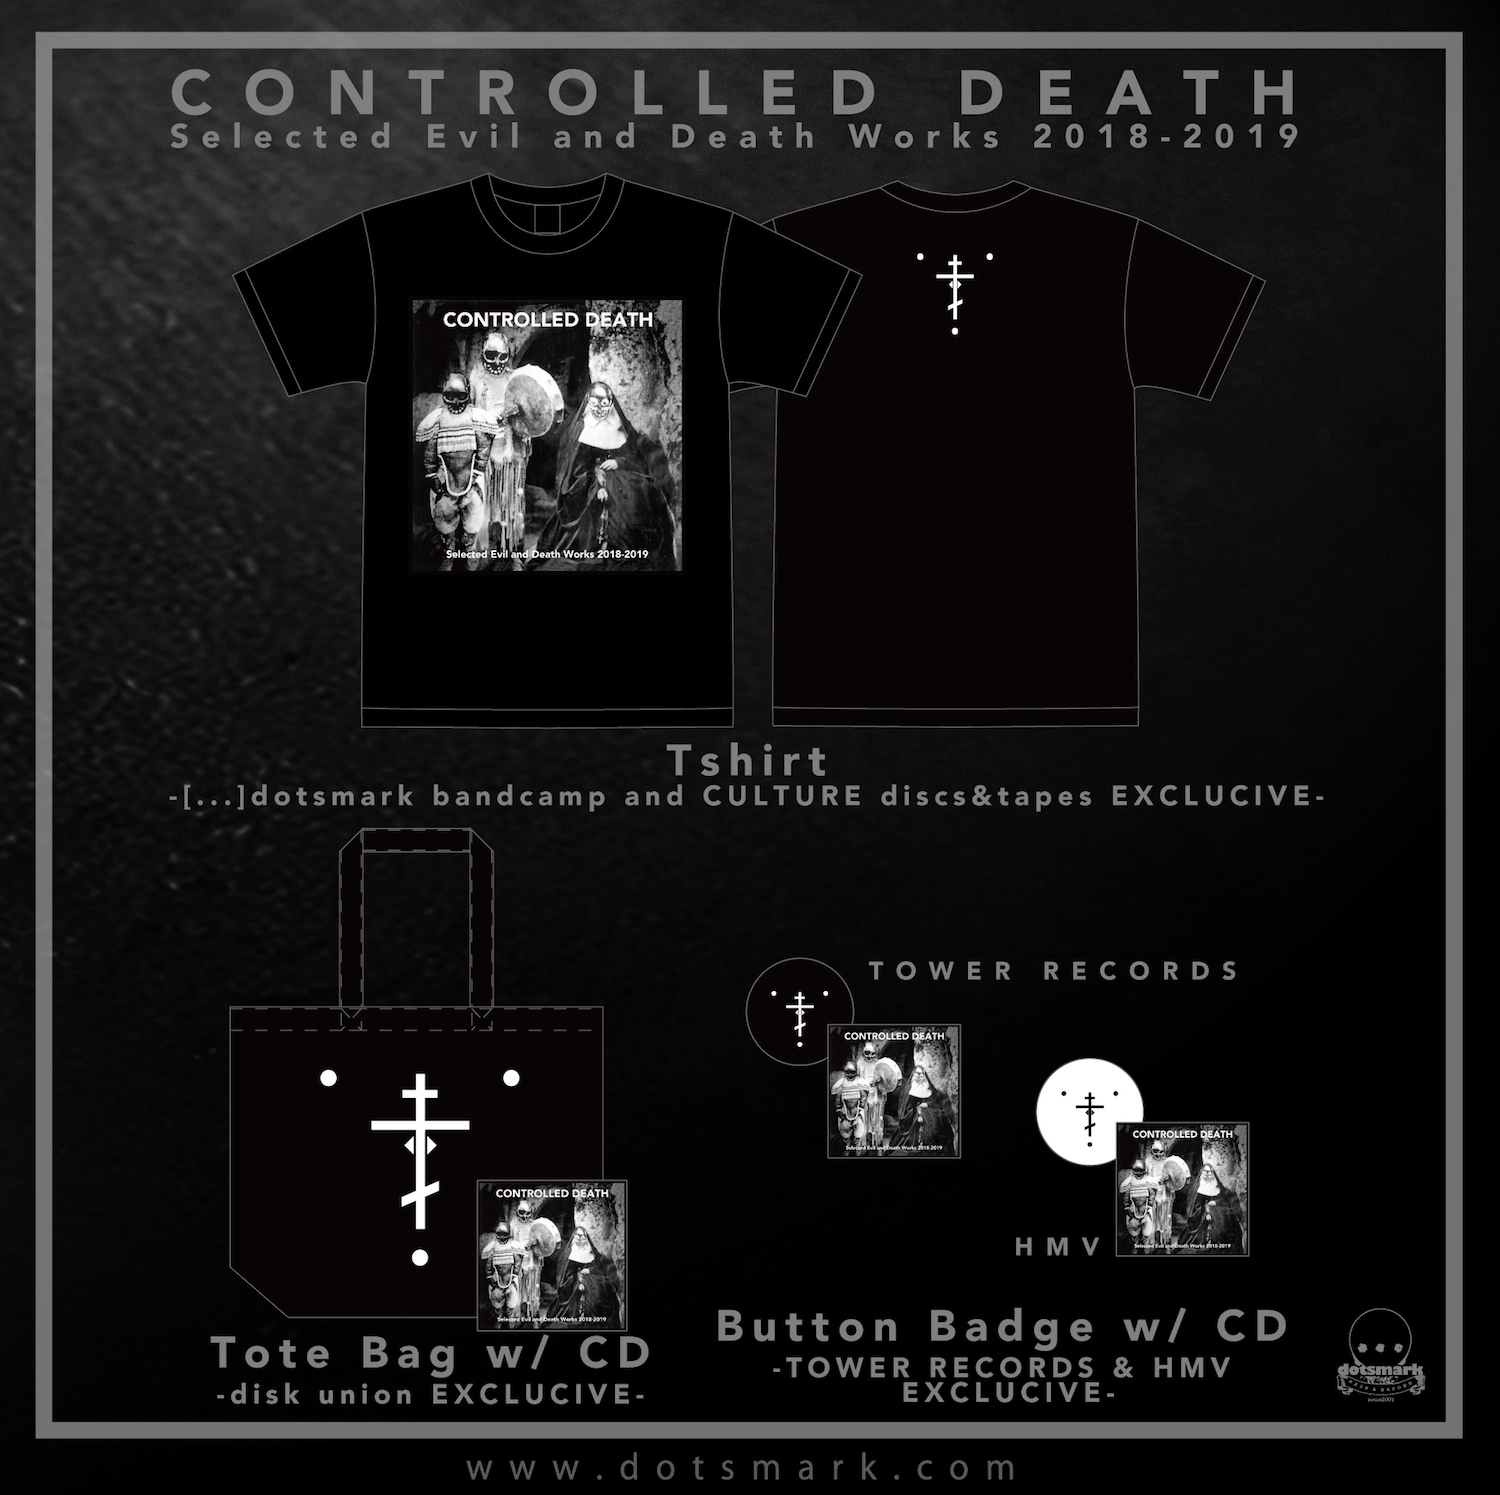 CONTROLLED DEATH 'Selected Evil and Death Works 2018-2019' Merchandise